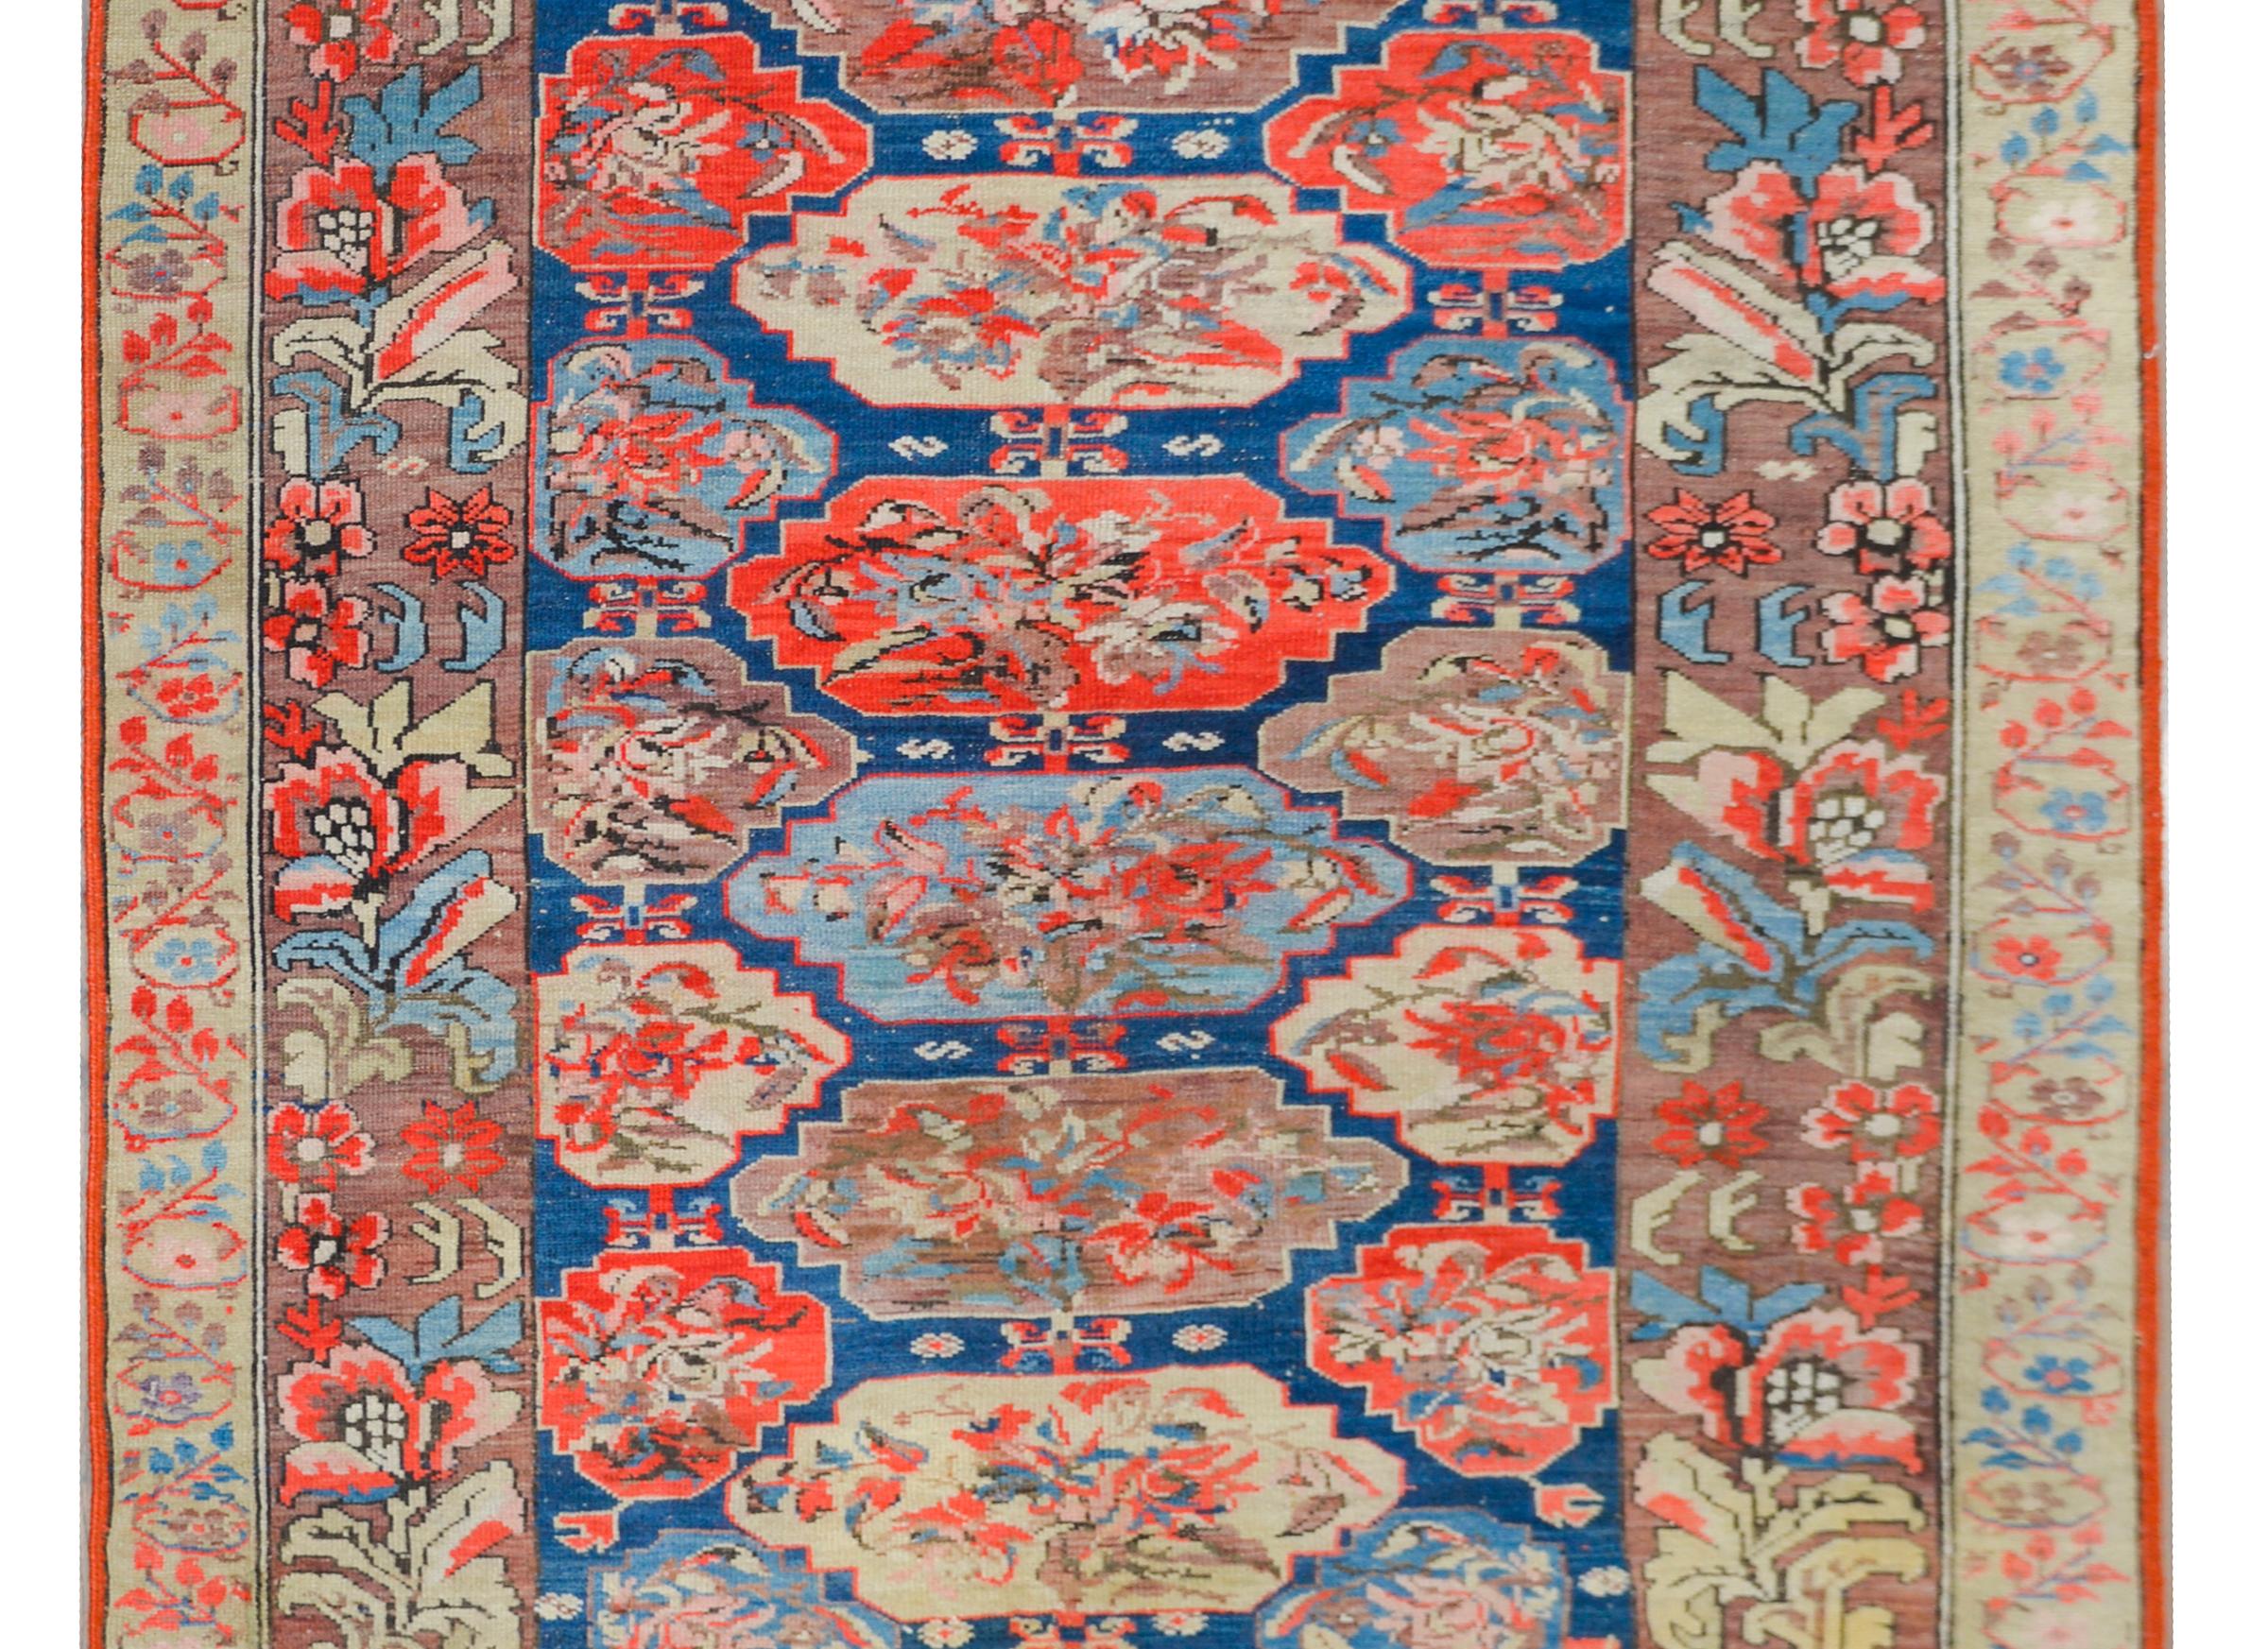 A stunning and rare early 20th century Persian Karabak rug with the most beautiful pattern of floral medallions woven in crimson, cream, indigo, and pink, and set against a dark indigo background. The border is wonderful woven in more floral